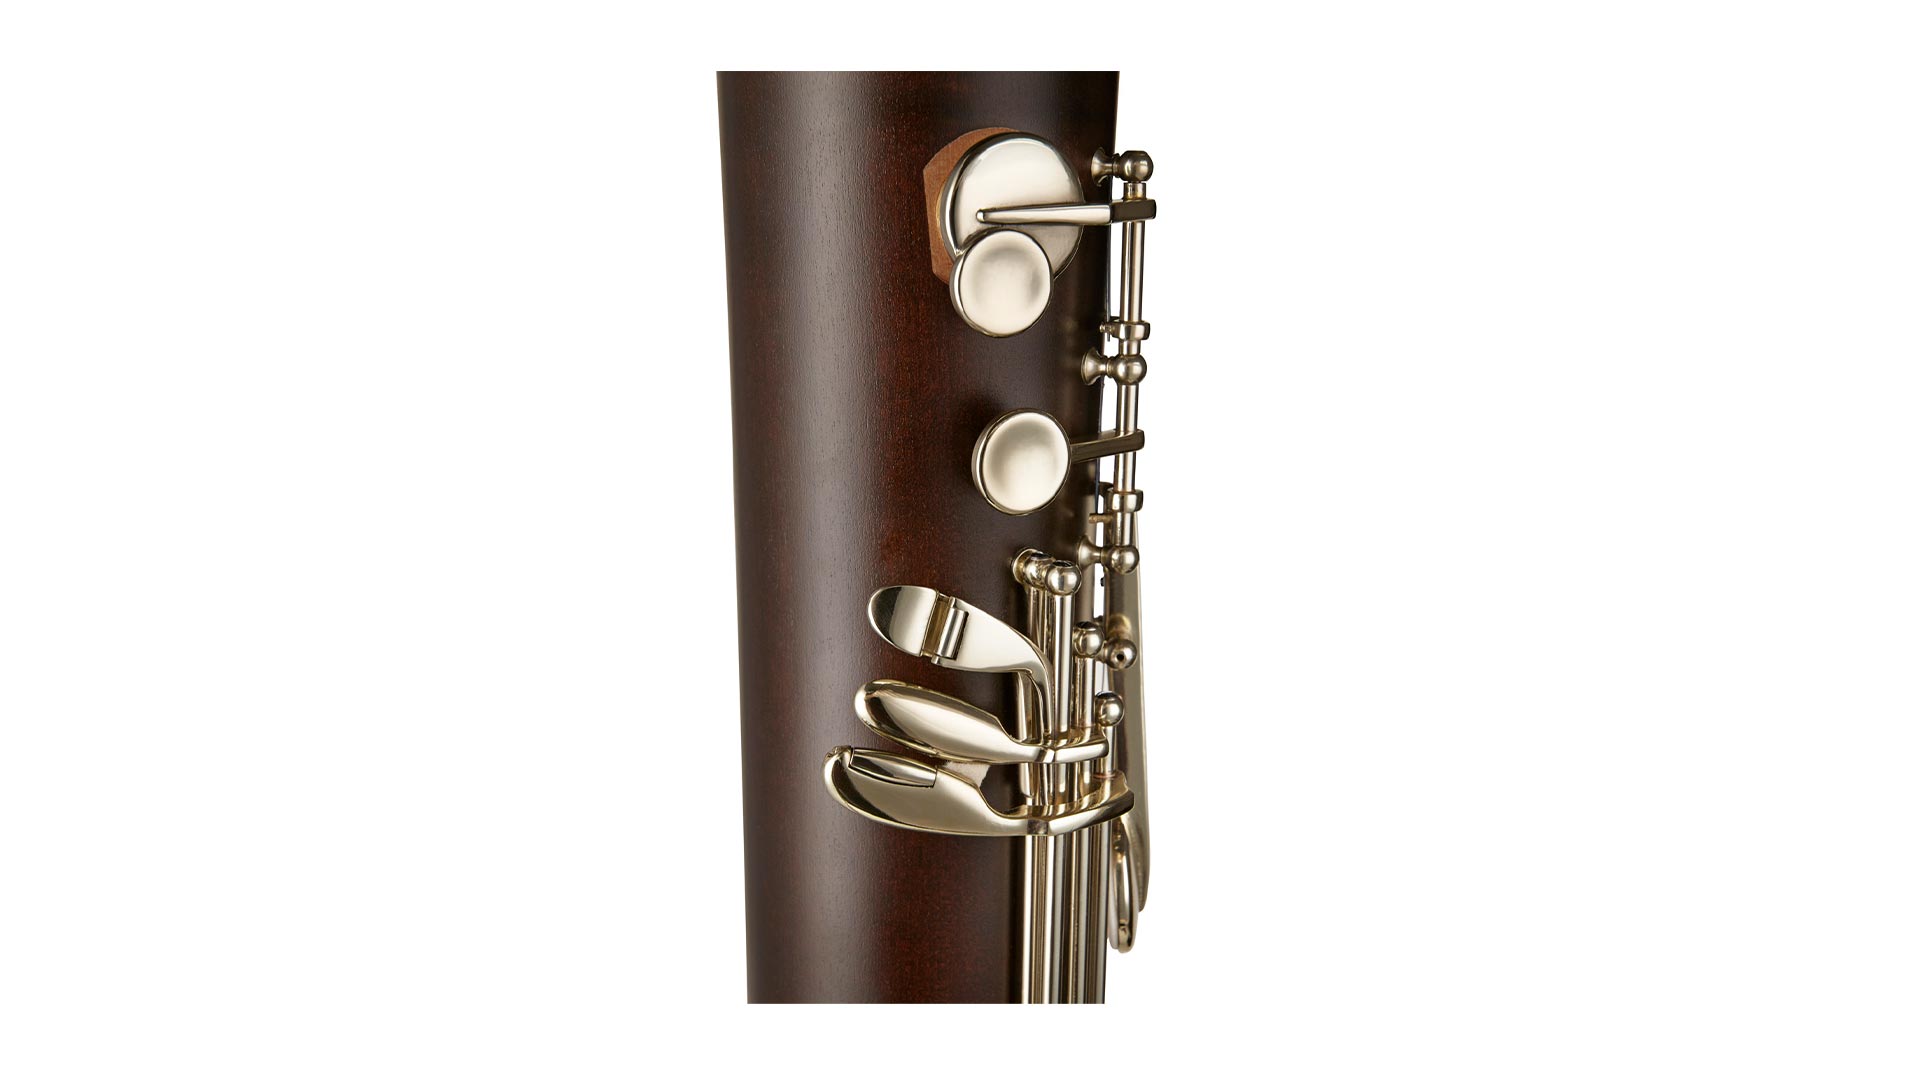 Moeck, Subbass in F, baroque double hole, maple stained